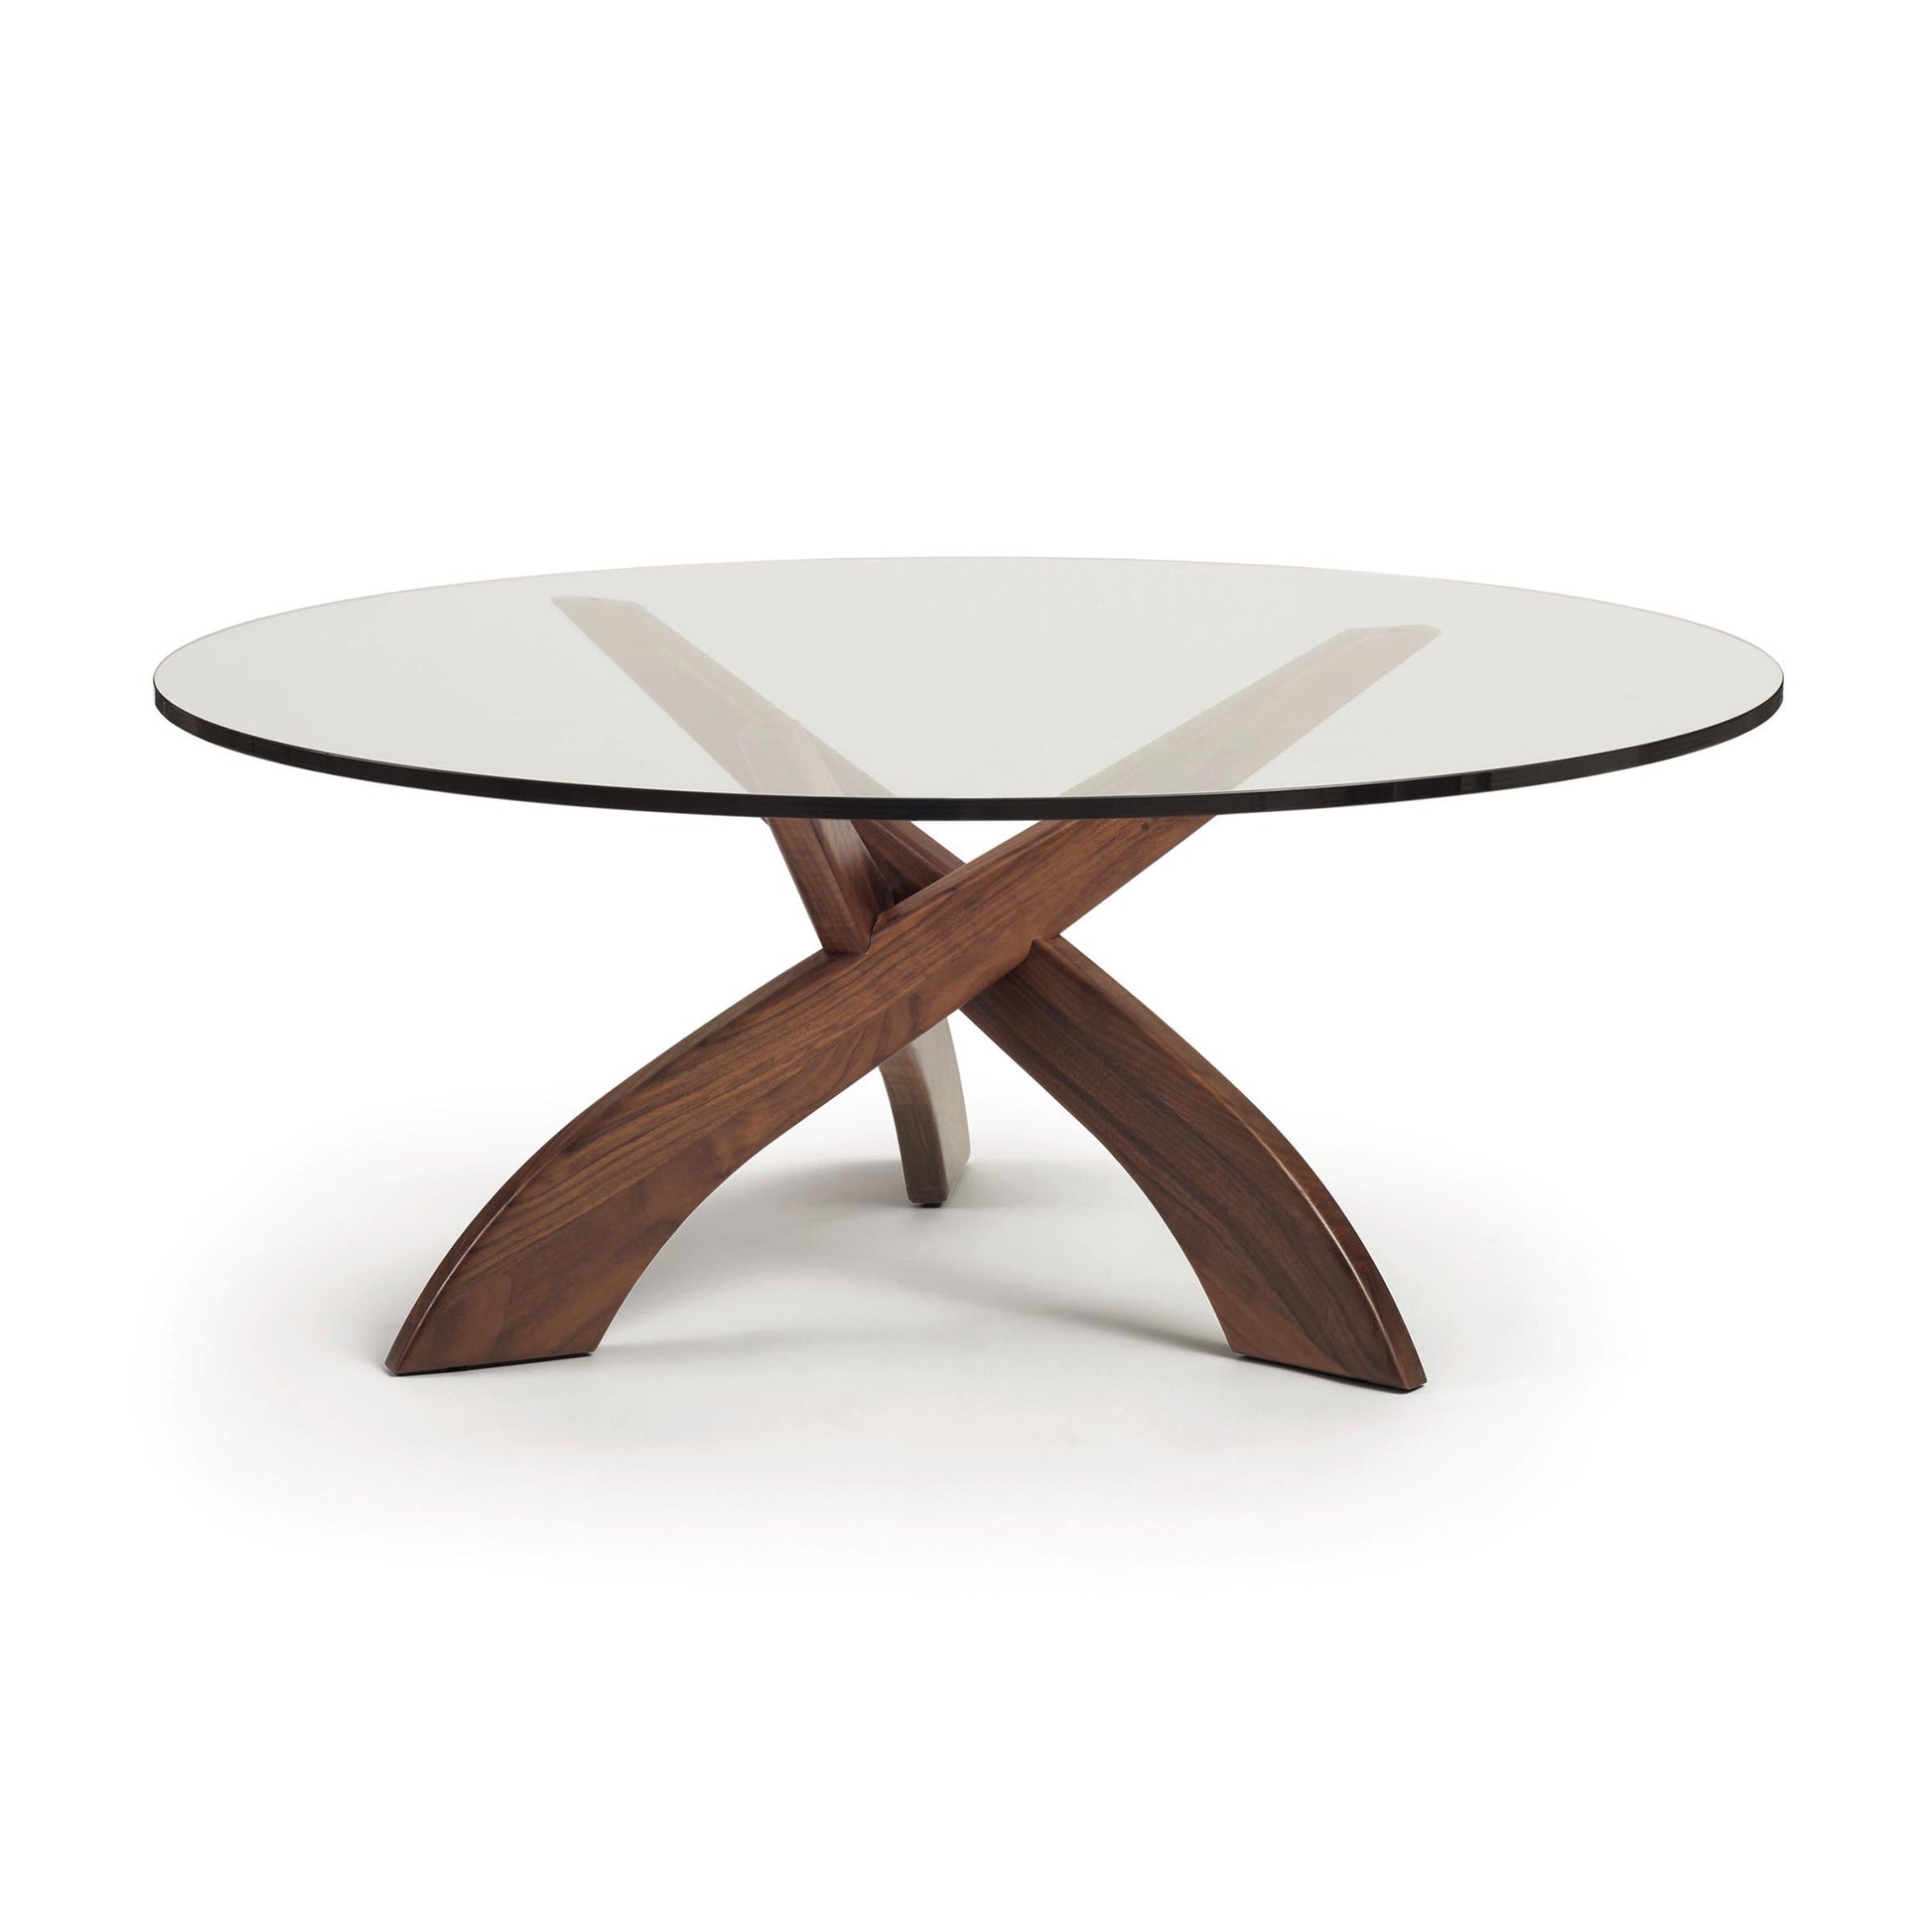 Modern Entwine Round Coffee Table from the Copeland Furniture Statements Collection with a crossed wooden base.